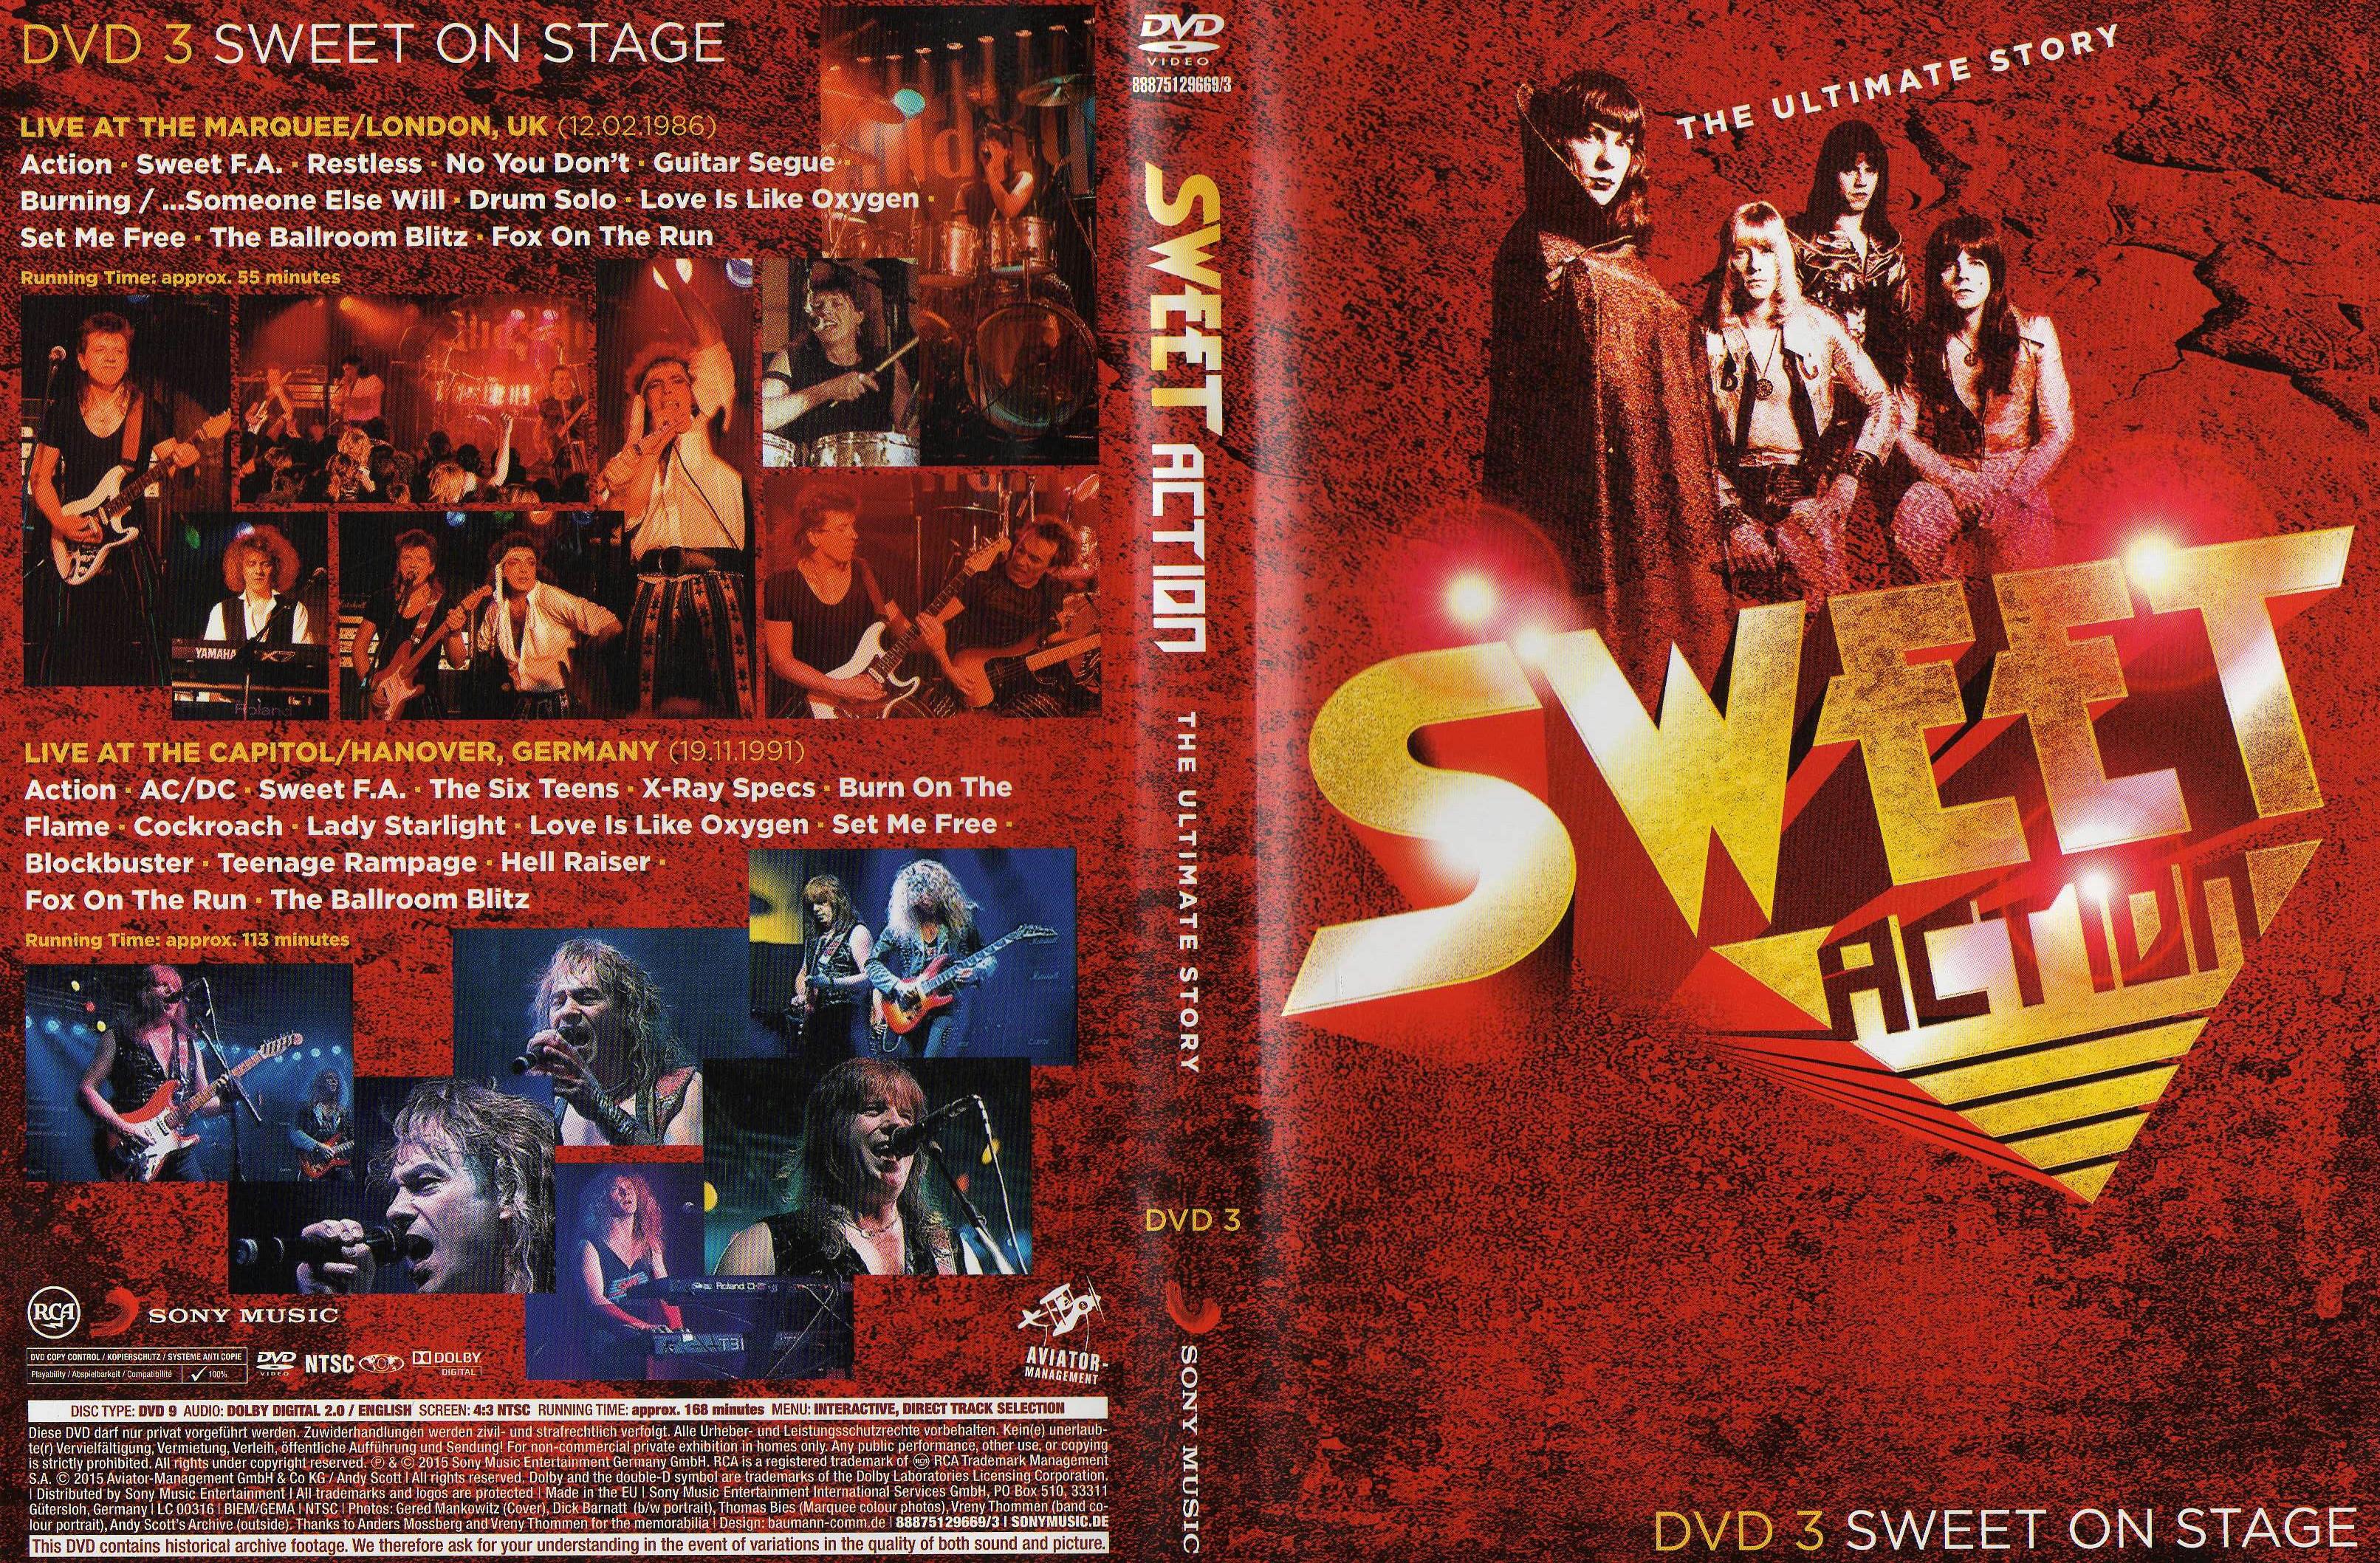 The Sweet - Action (Ultimate Story) (DVD3-Sweet On Stage) (2015) - front.